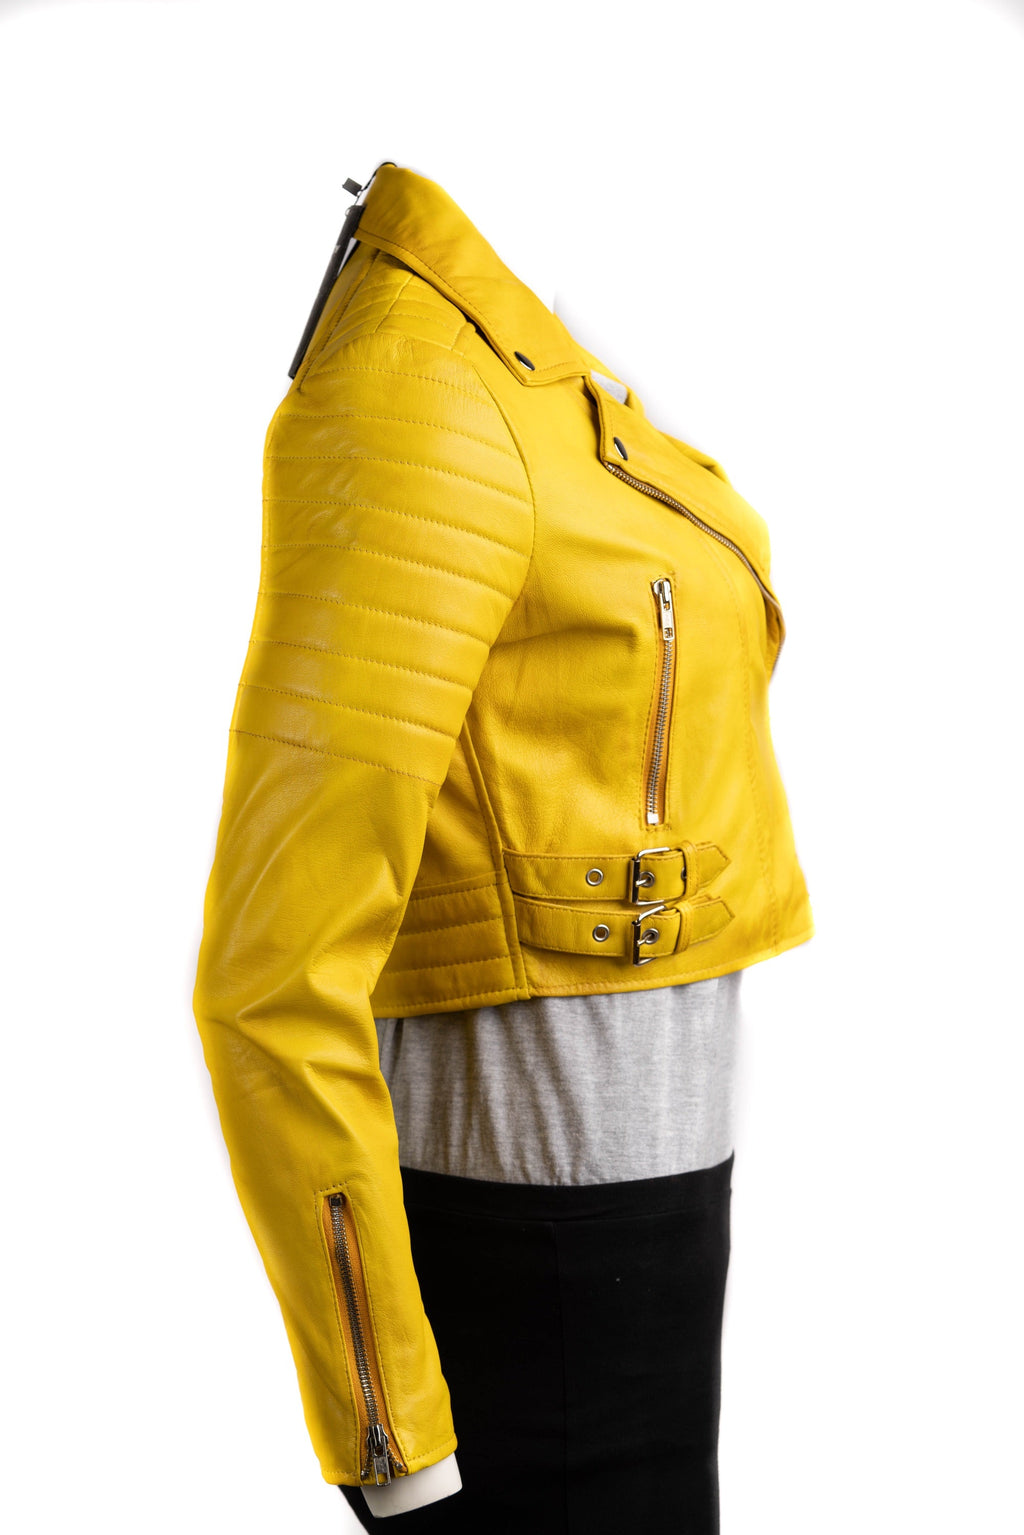 Ladies Yellow Cropped Leather Biker Style Jacket: Concetta